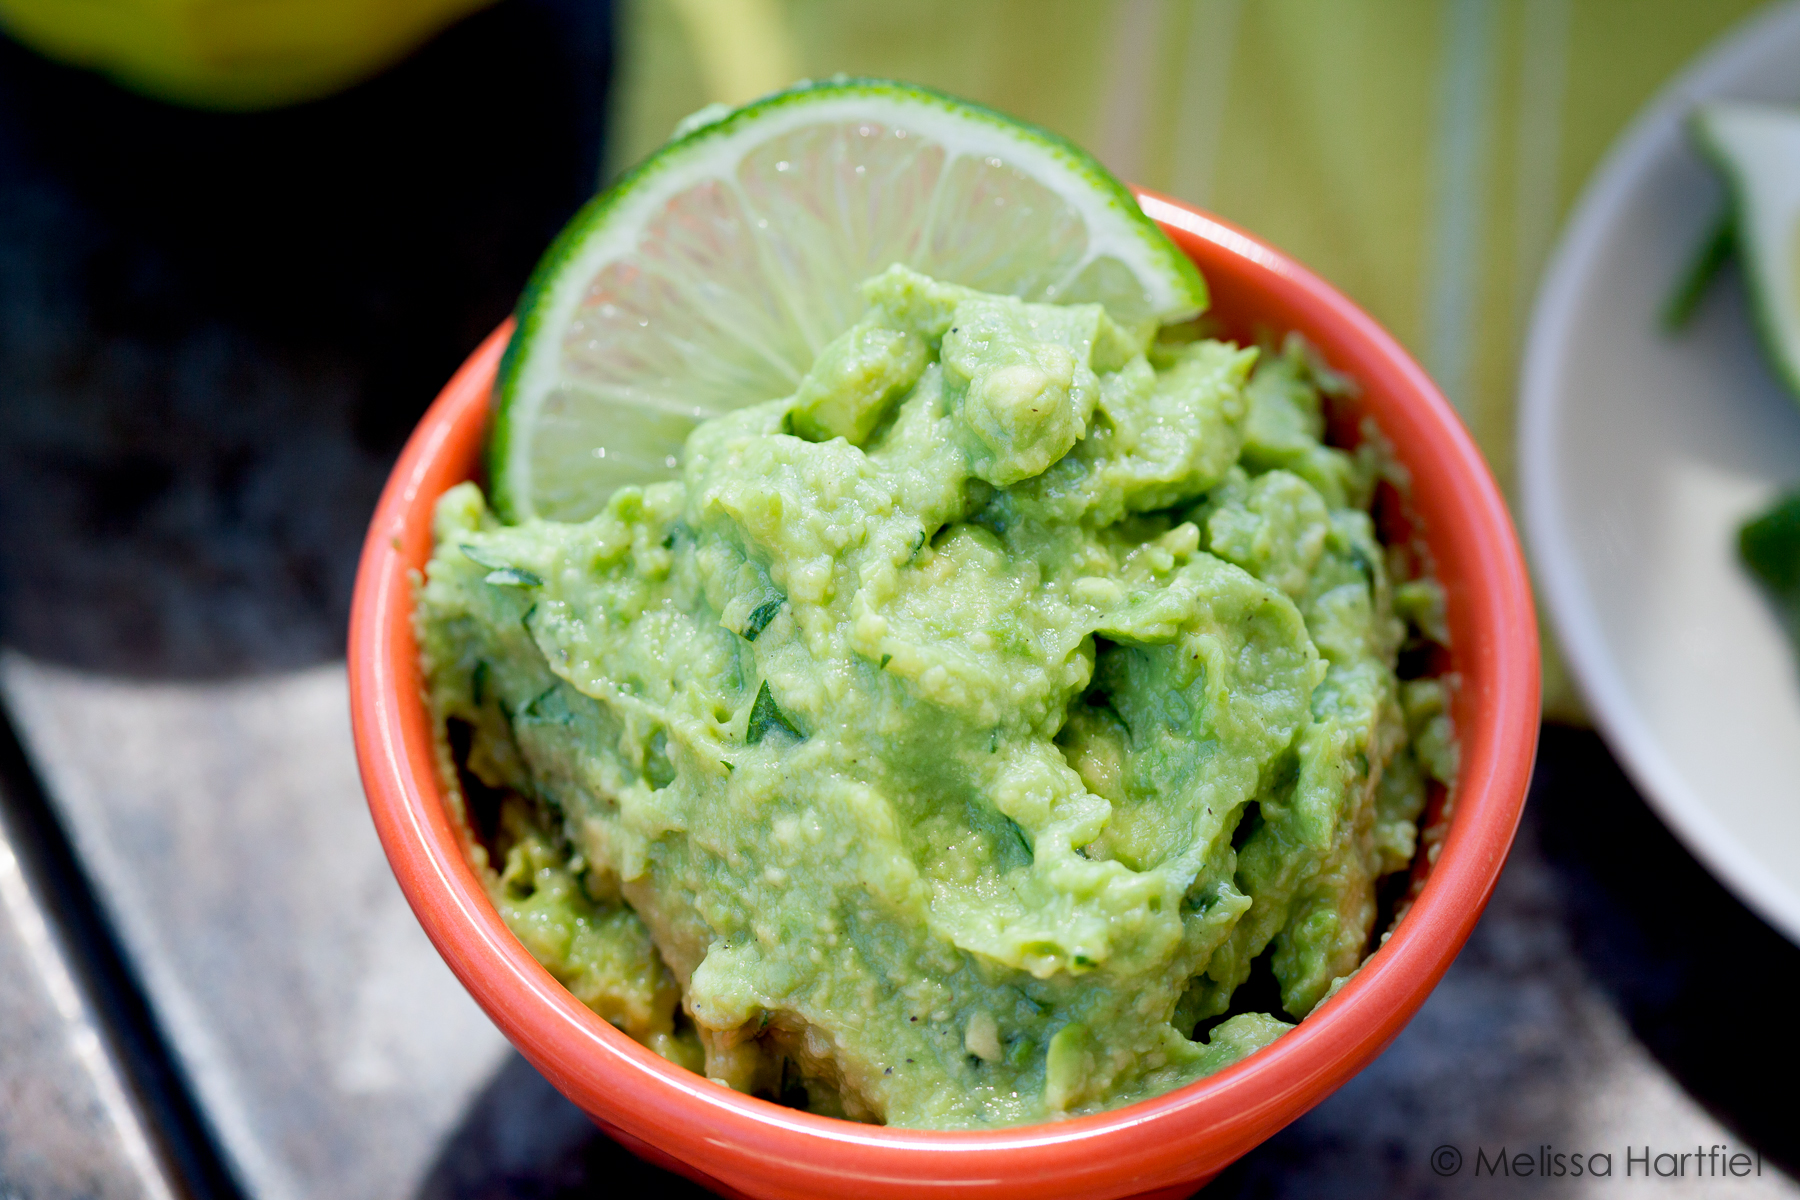 guacamole garnished with a lime wedge in an orange bowl